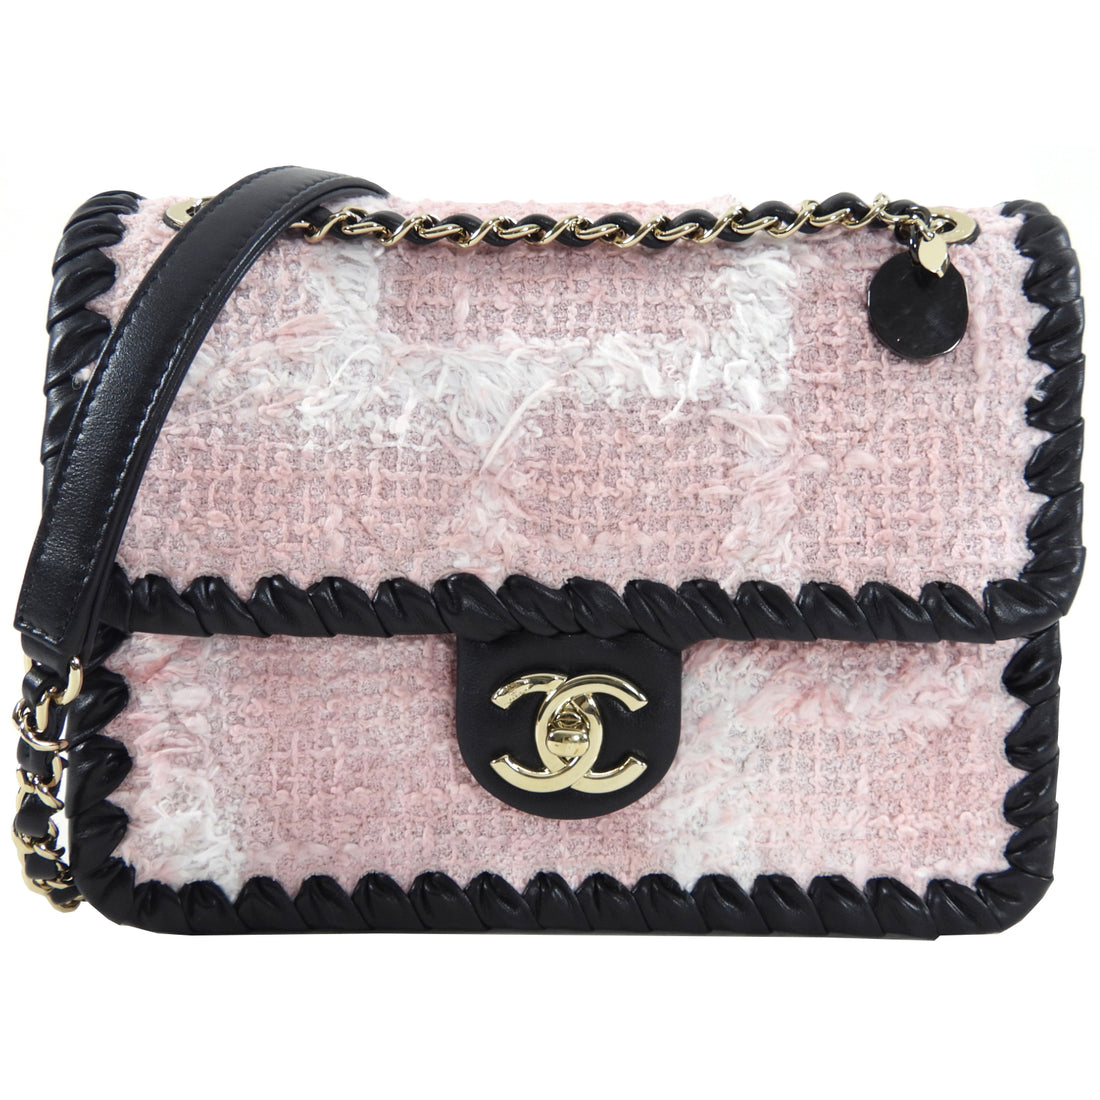 Chanel 22C Pink Tweed and Black Leather Small Flap Bag – I MISS YOU VINTAGE